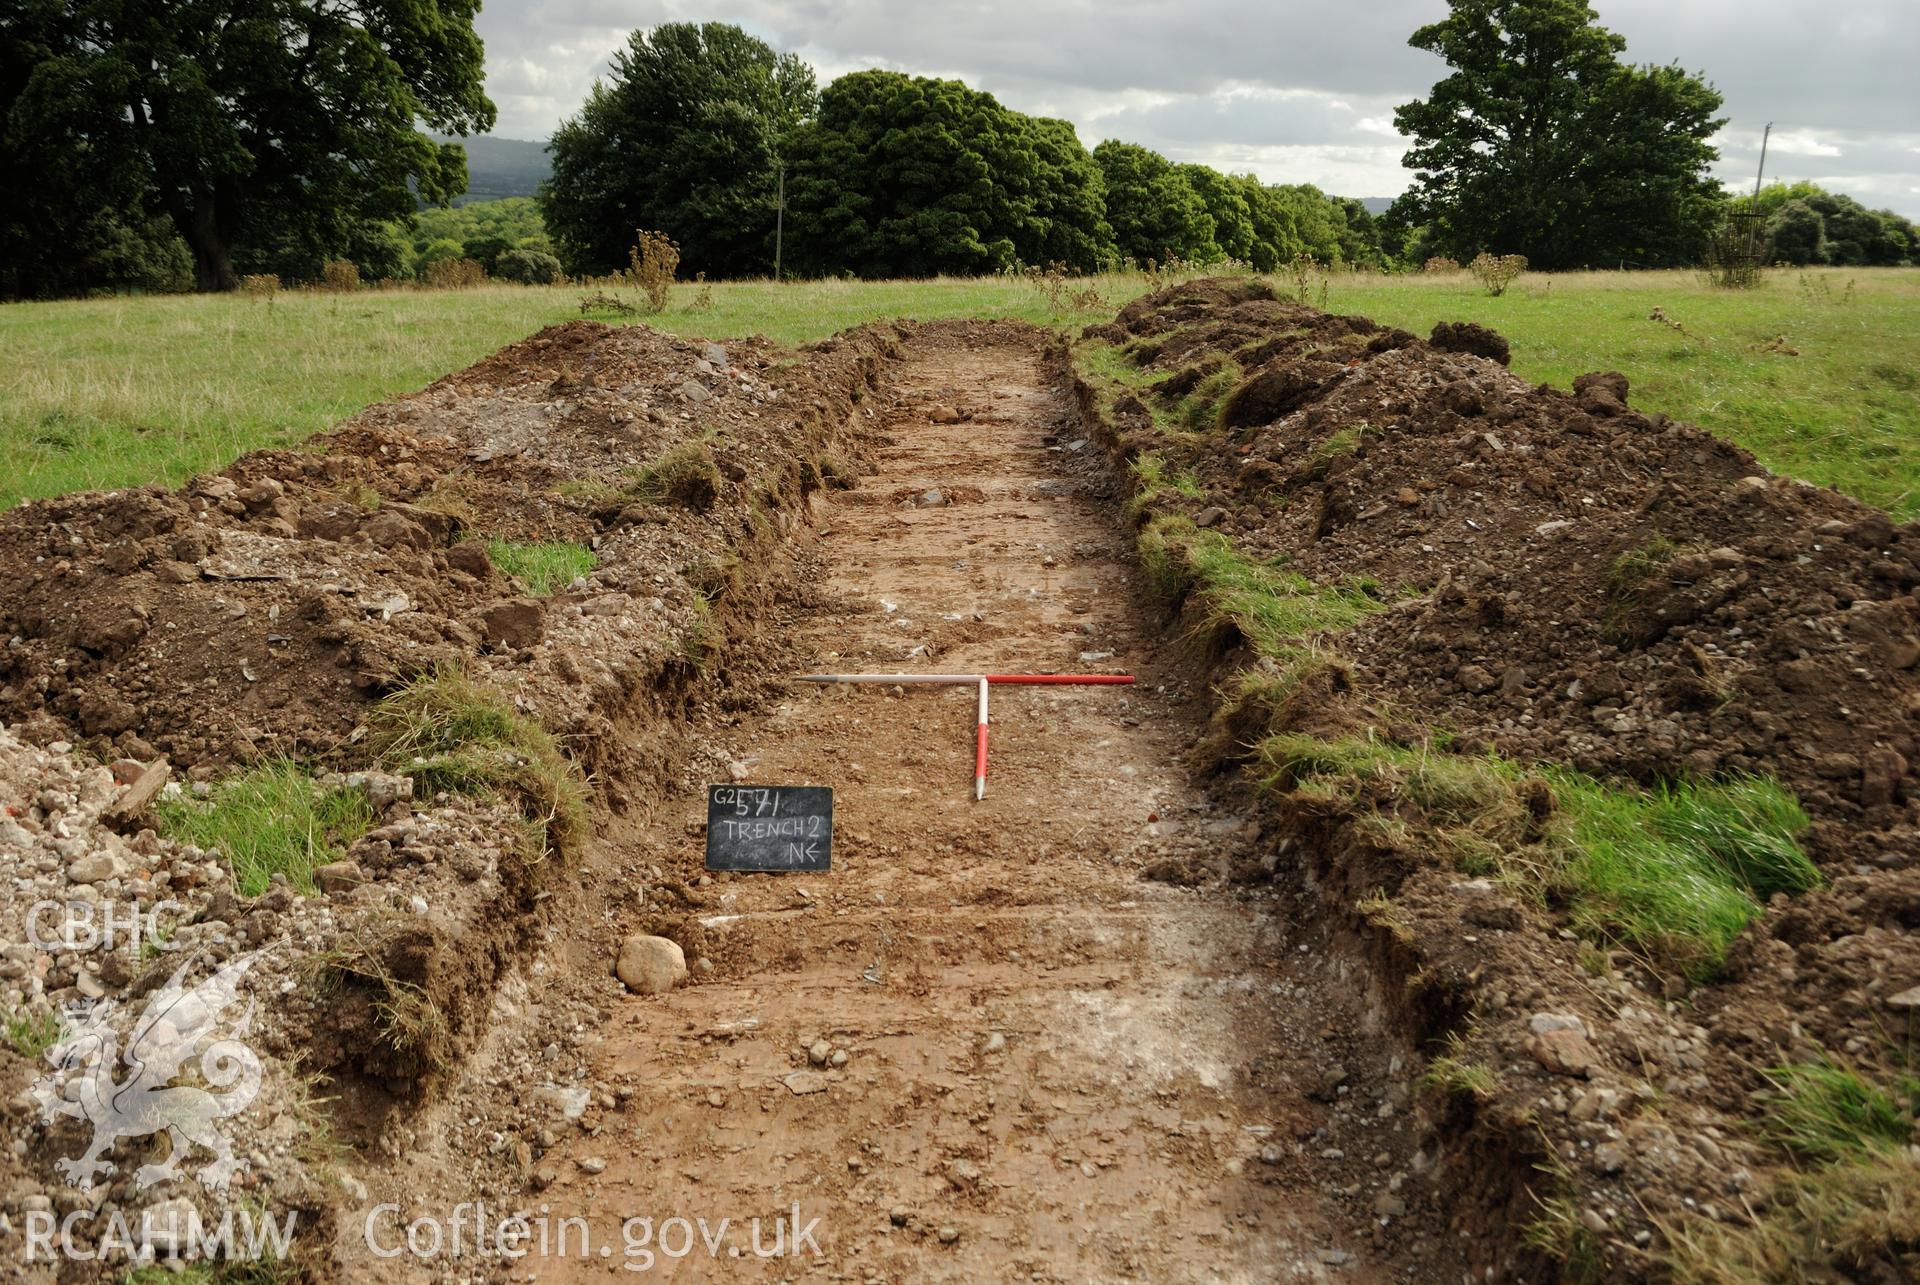 View from the west showing eastern terminal of Trench 2, post excavation. Photographed during archaeological evaluation of Kinmel Park, Abergele, conducted by Gwynedd Archaeological Trust on 24th August 2018. Project no. 2571.